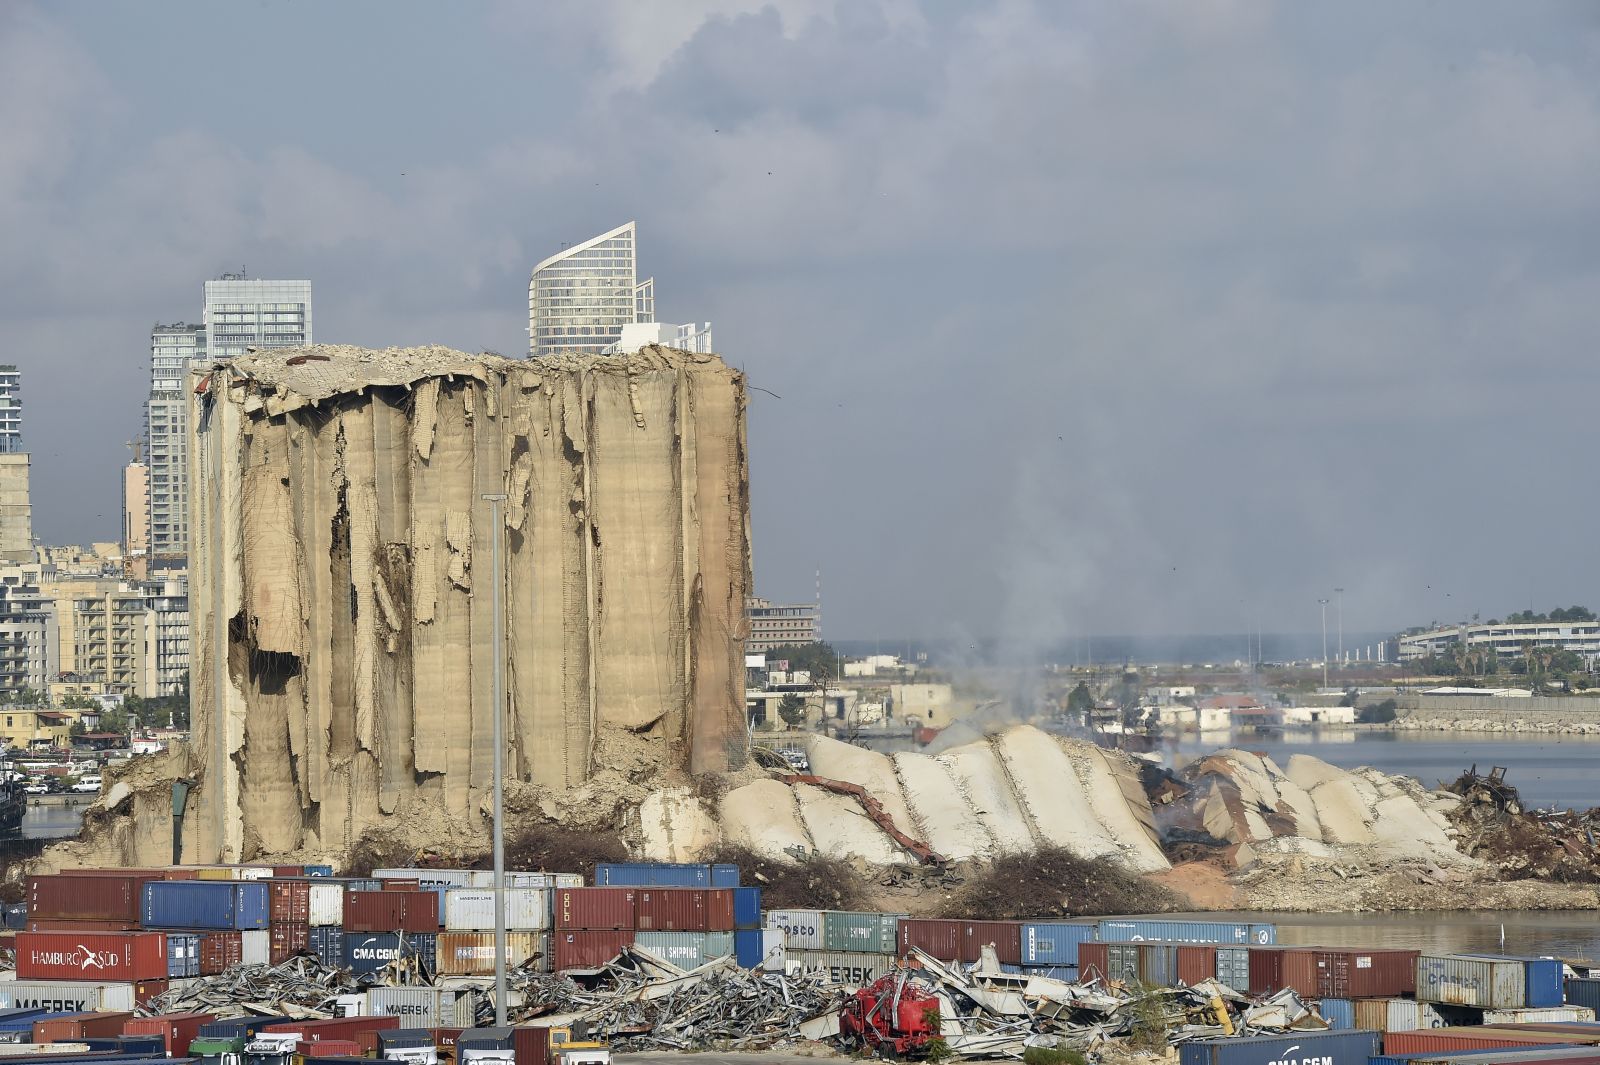 epa10134208 Dust rises after a section of the wheat silos collapsed at the Port of Beirut, Lebanon, 23 August 2022. The Beirut Port wheat silos, damaged by the Beirut Port blast of 2020, began to collapse on 31 July 2022, while another part came down on 04 August, on the second anniversary of the explosion. A third section collapsed on 23 August 2022.  EPA/WAEL HAMZEH